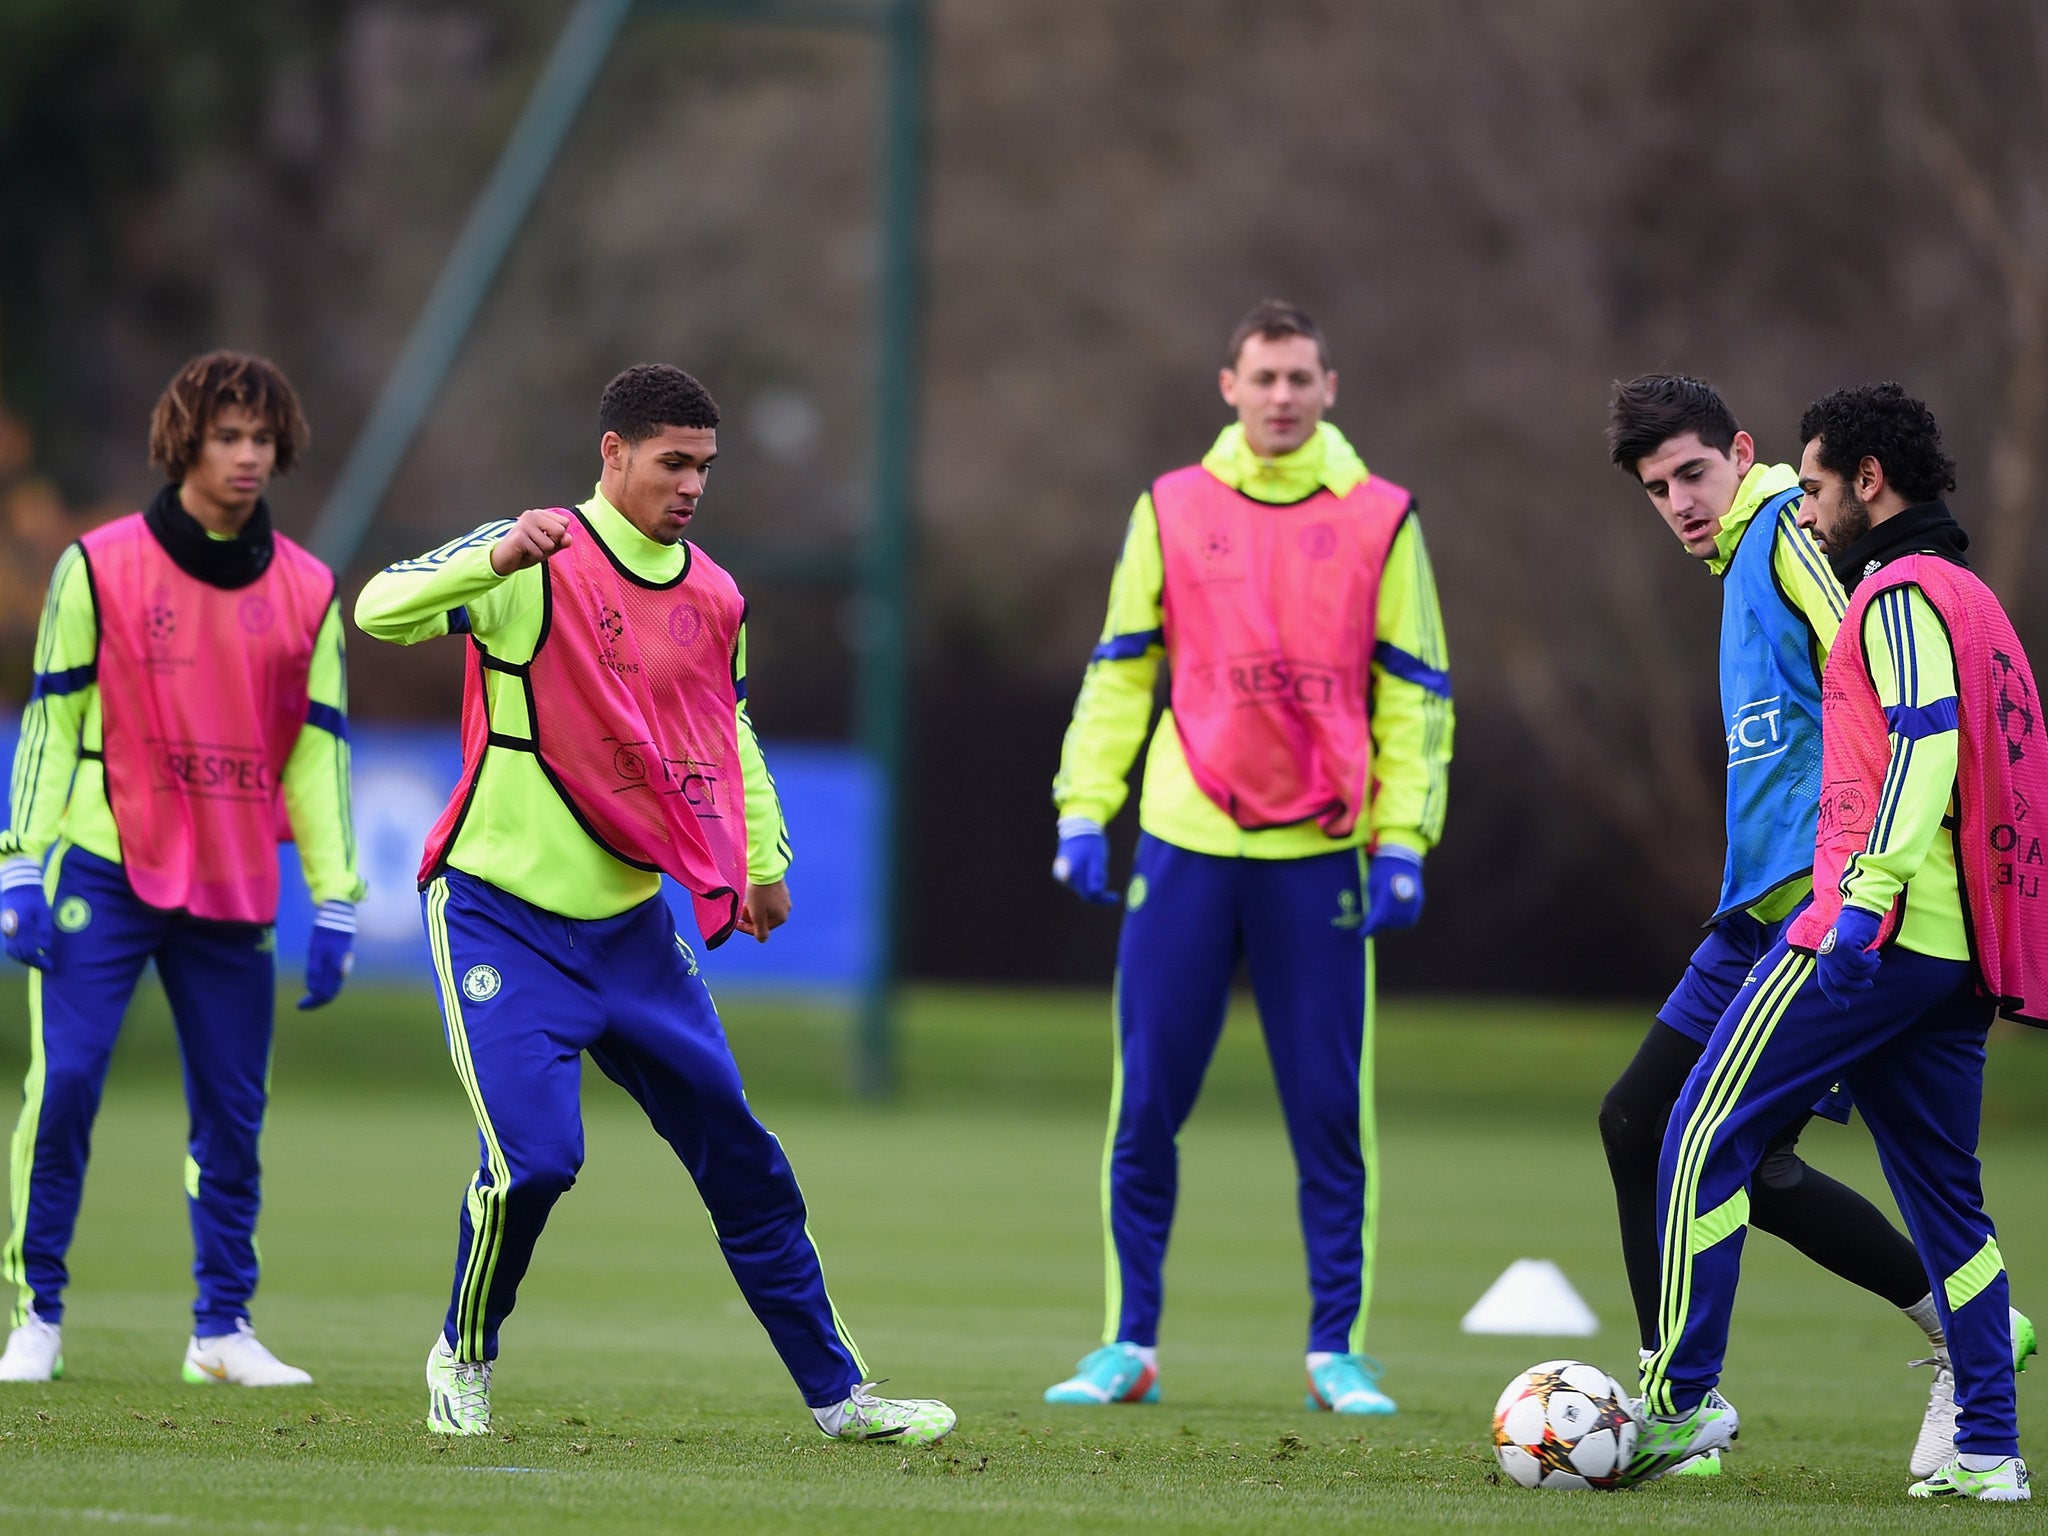 Ruben Loftus-Cheek of Chelsea (2nd Left) trains with his team-mates during a Chelsea training session.